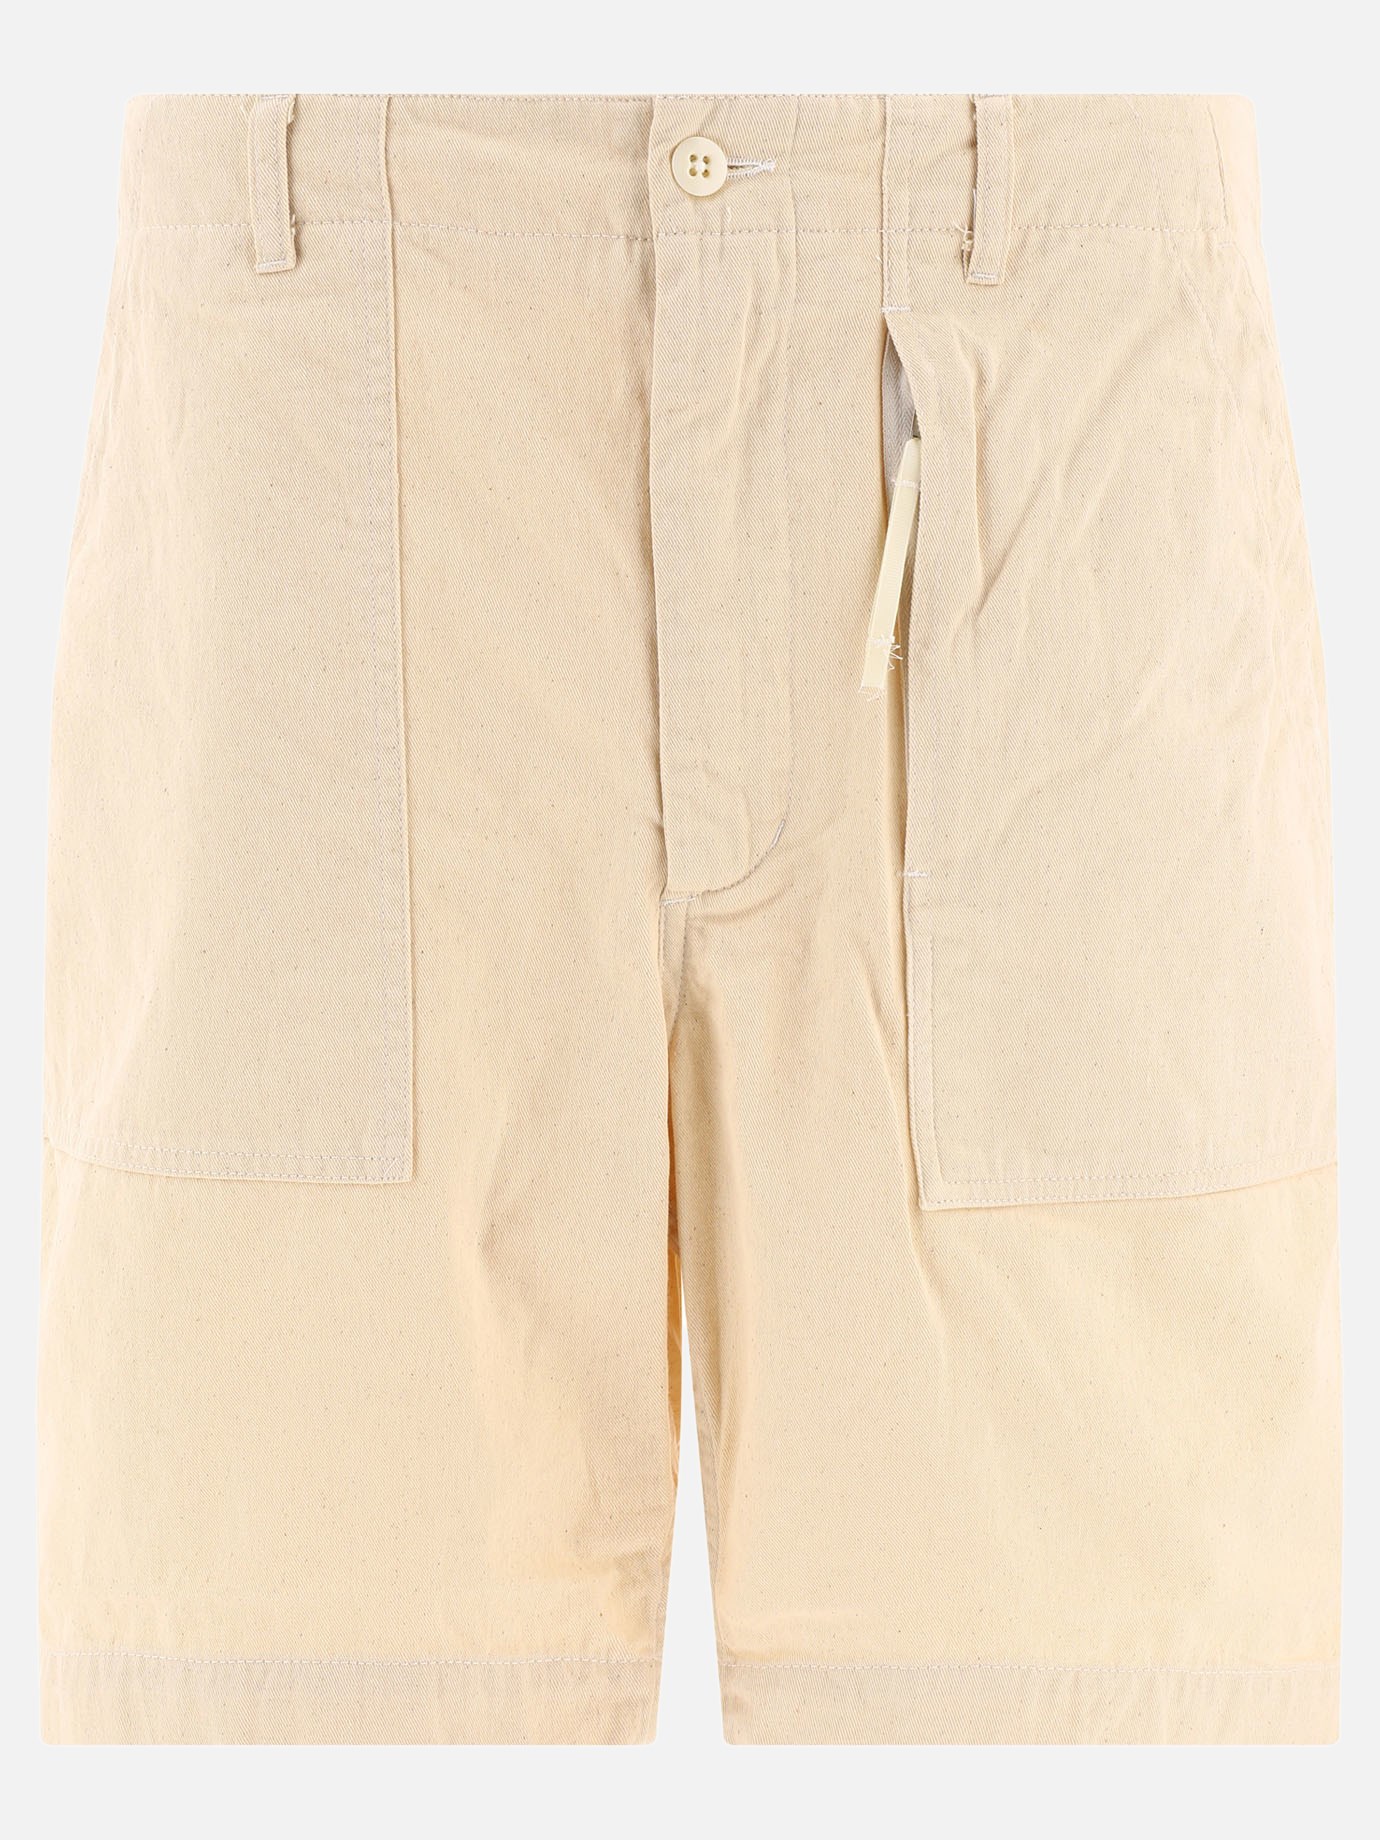 Short  Fatigue by Engineered Garments - 0